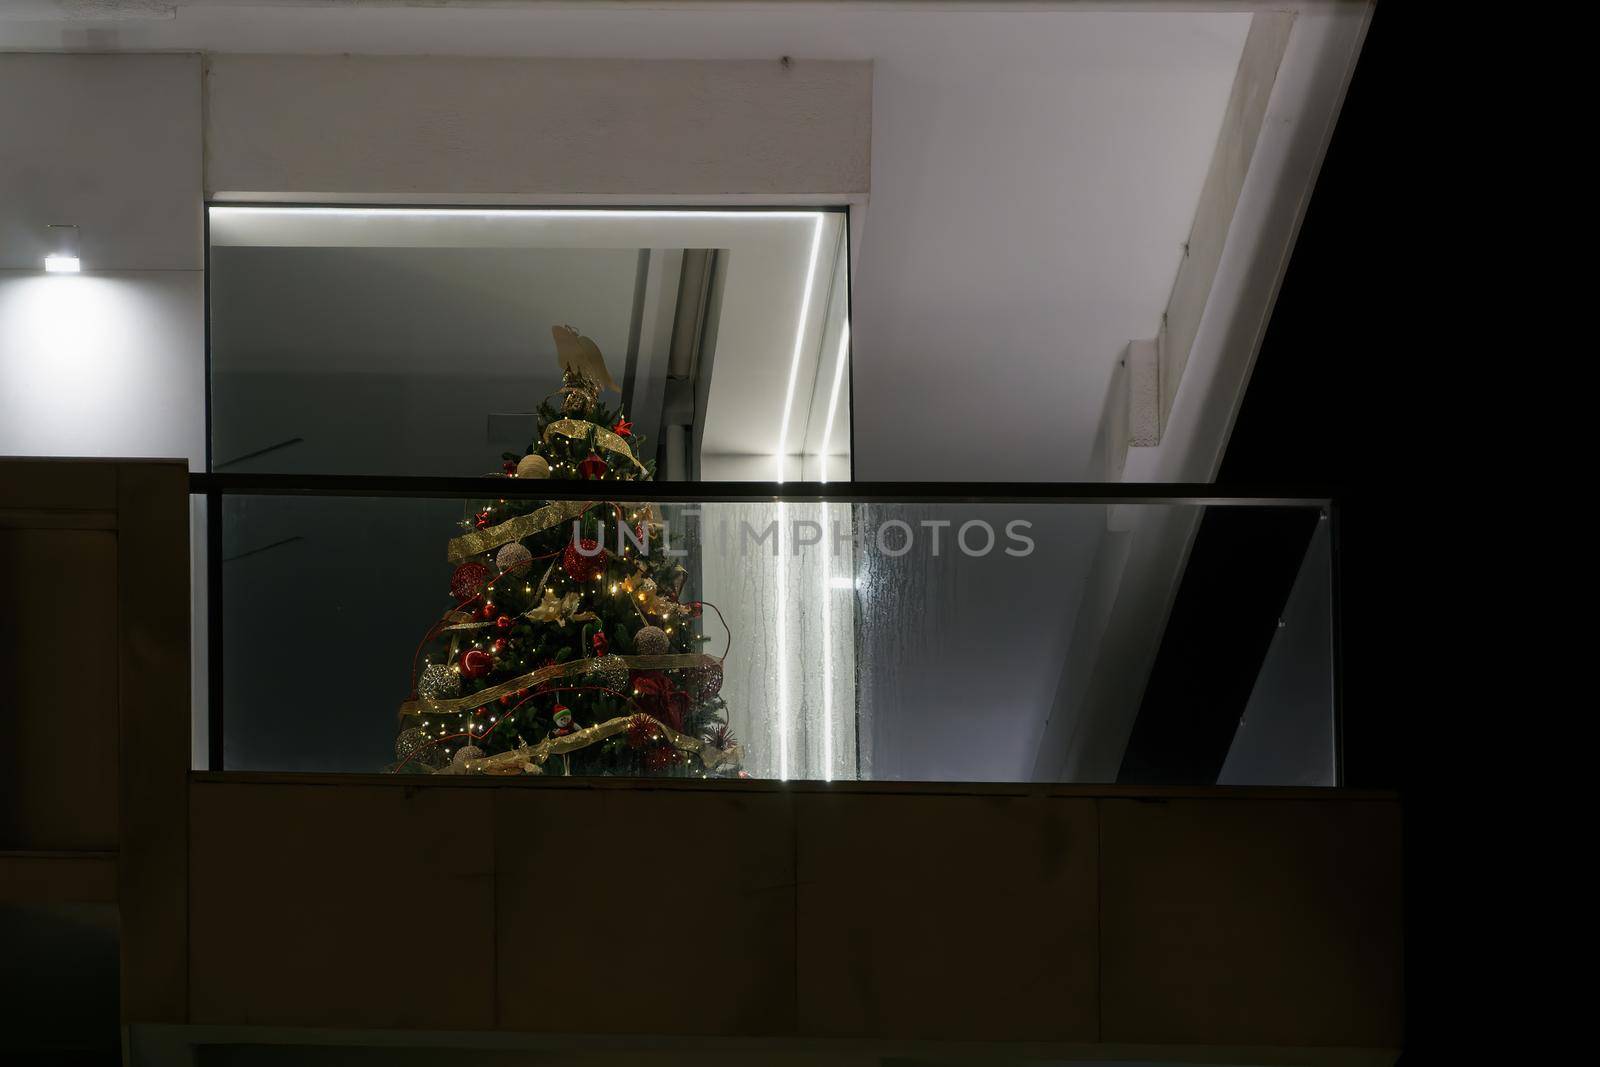 Night view of festive tree instalment with hanging seasonal ribbons, lights and balls in Thessaloniki, Greece.